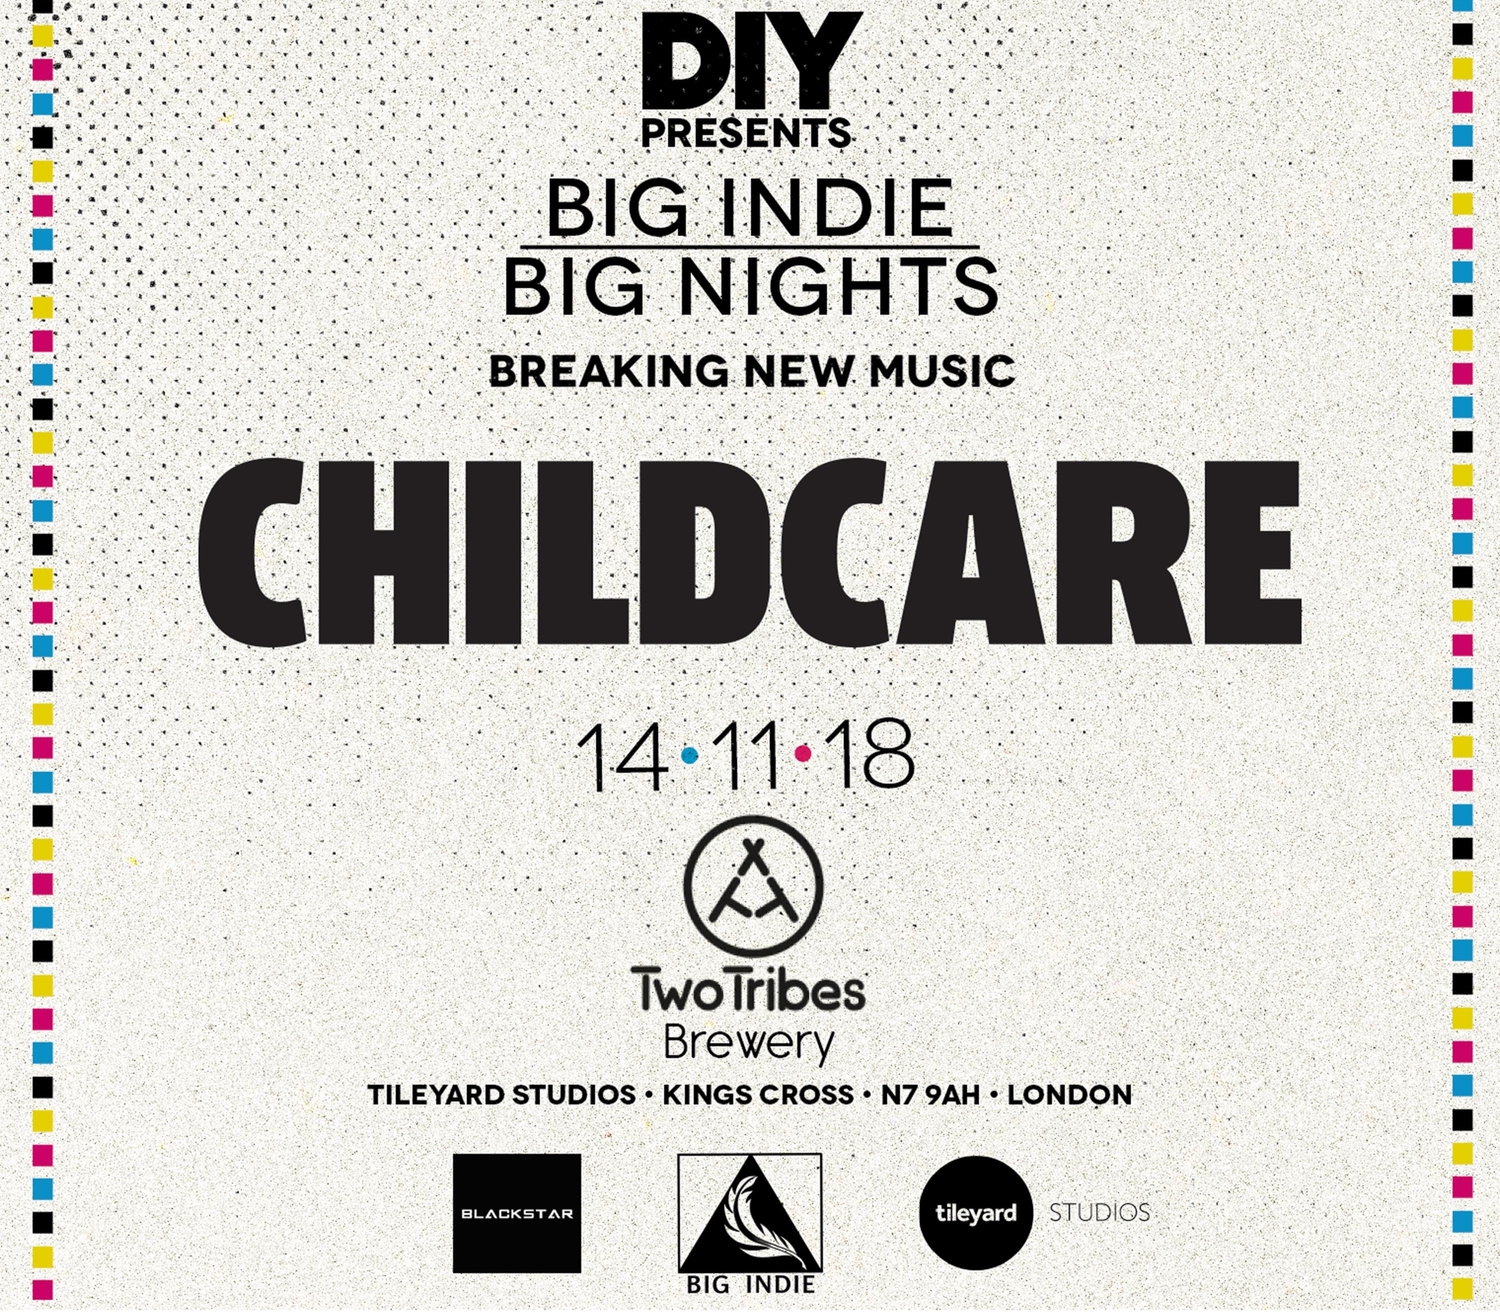 Childcare to play next month's edition of Big Indie Big Nights